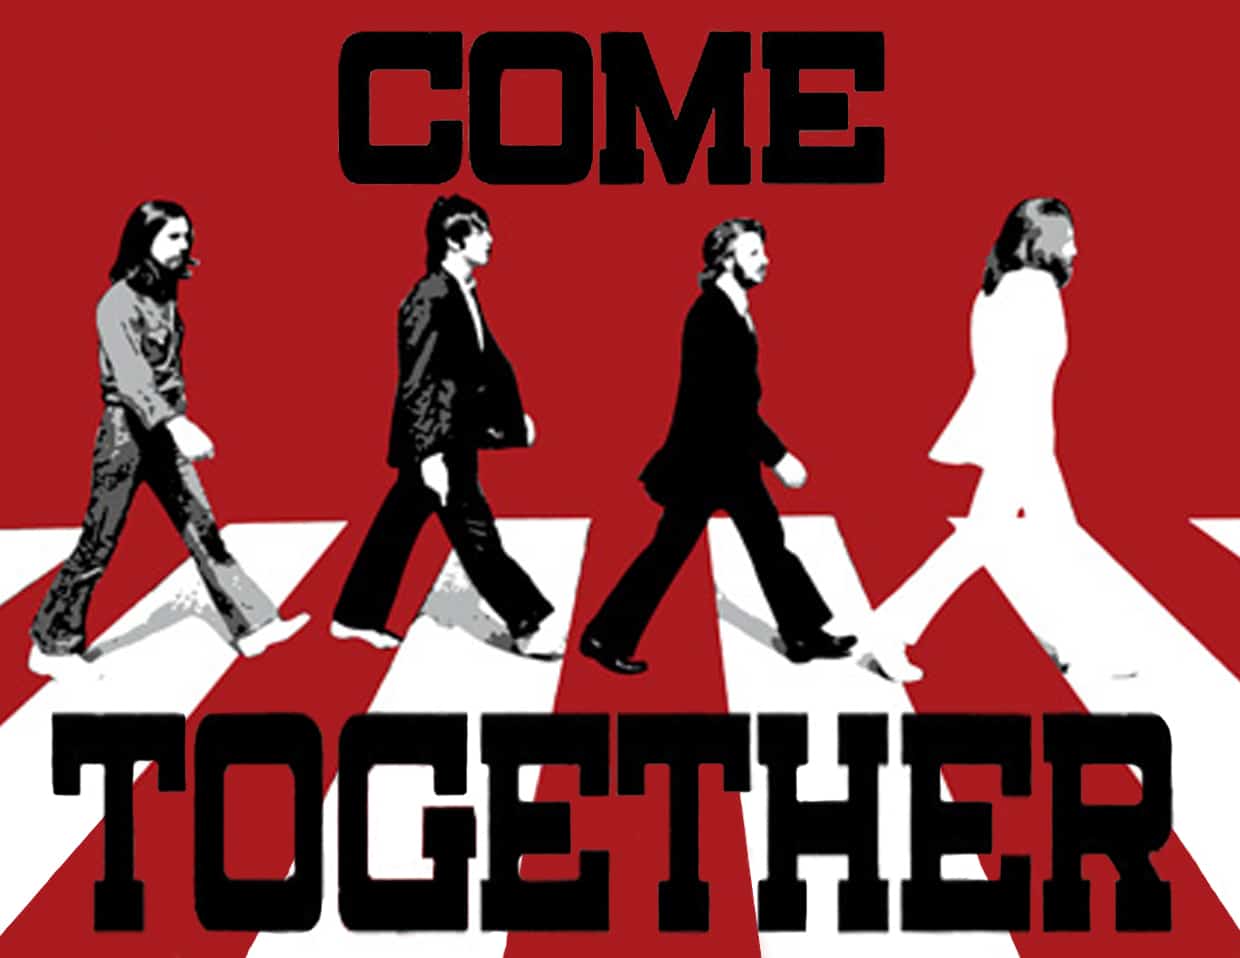 Come Together - songs weird lyrics